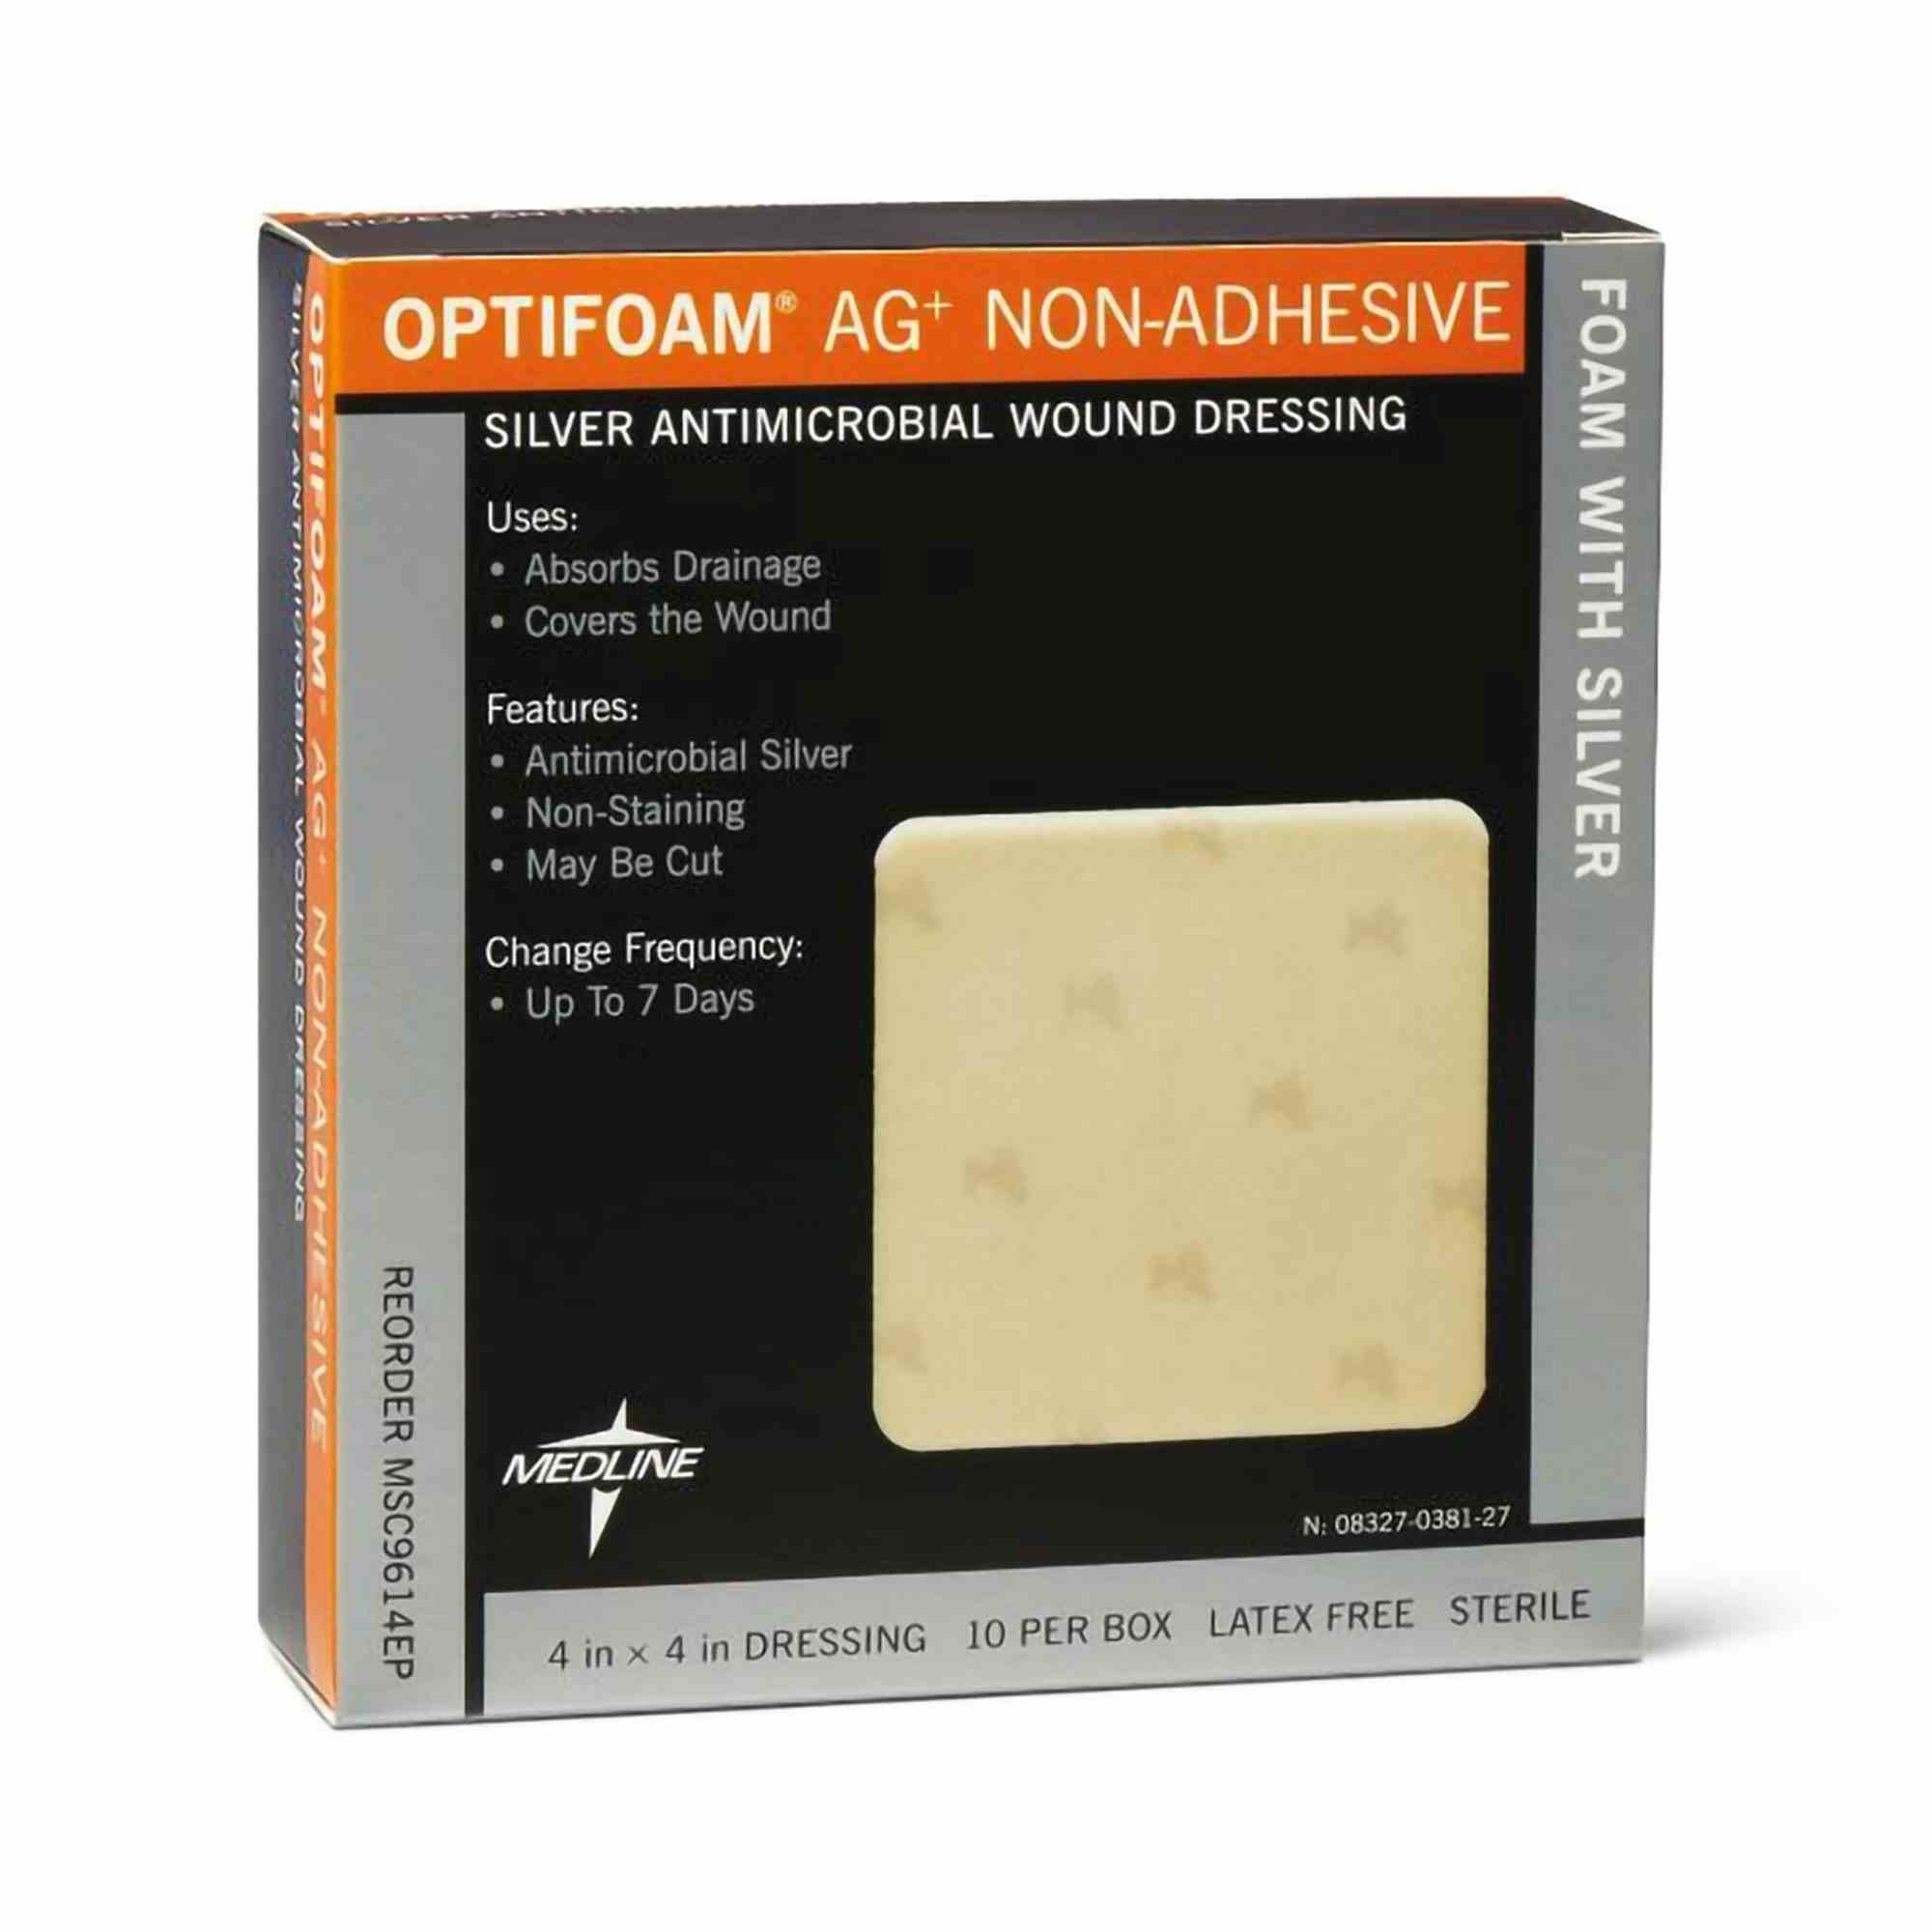 Optifoam Ag+ Non-Adhesive Silver Antimicrobial Wound Dressing, 4 X 4", MSC9614EP, Box of 10